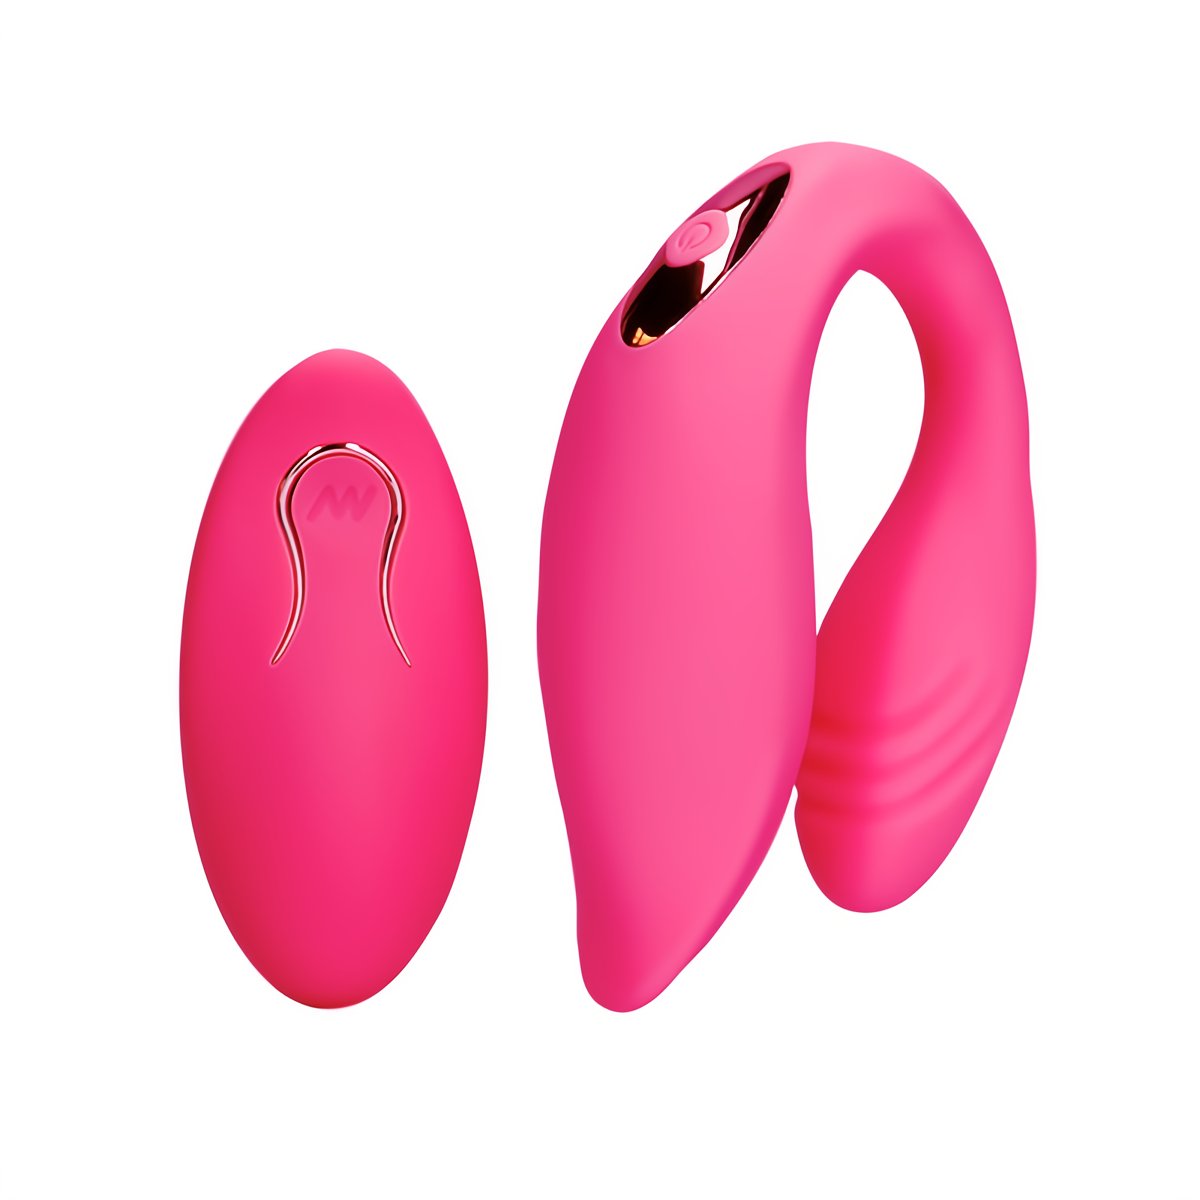 Couple Toy with Remote Control - Wild Strawberry - EroticToyzProducten,Toys,Toys voor Koppels,Duo - Vibrators,Duo - Vibrators,,Loveline by Shots